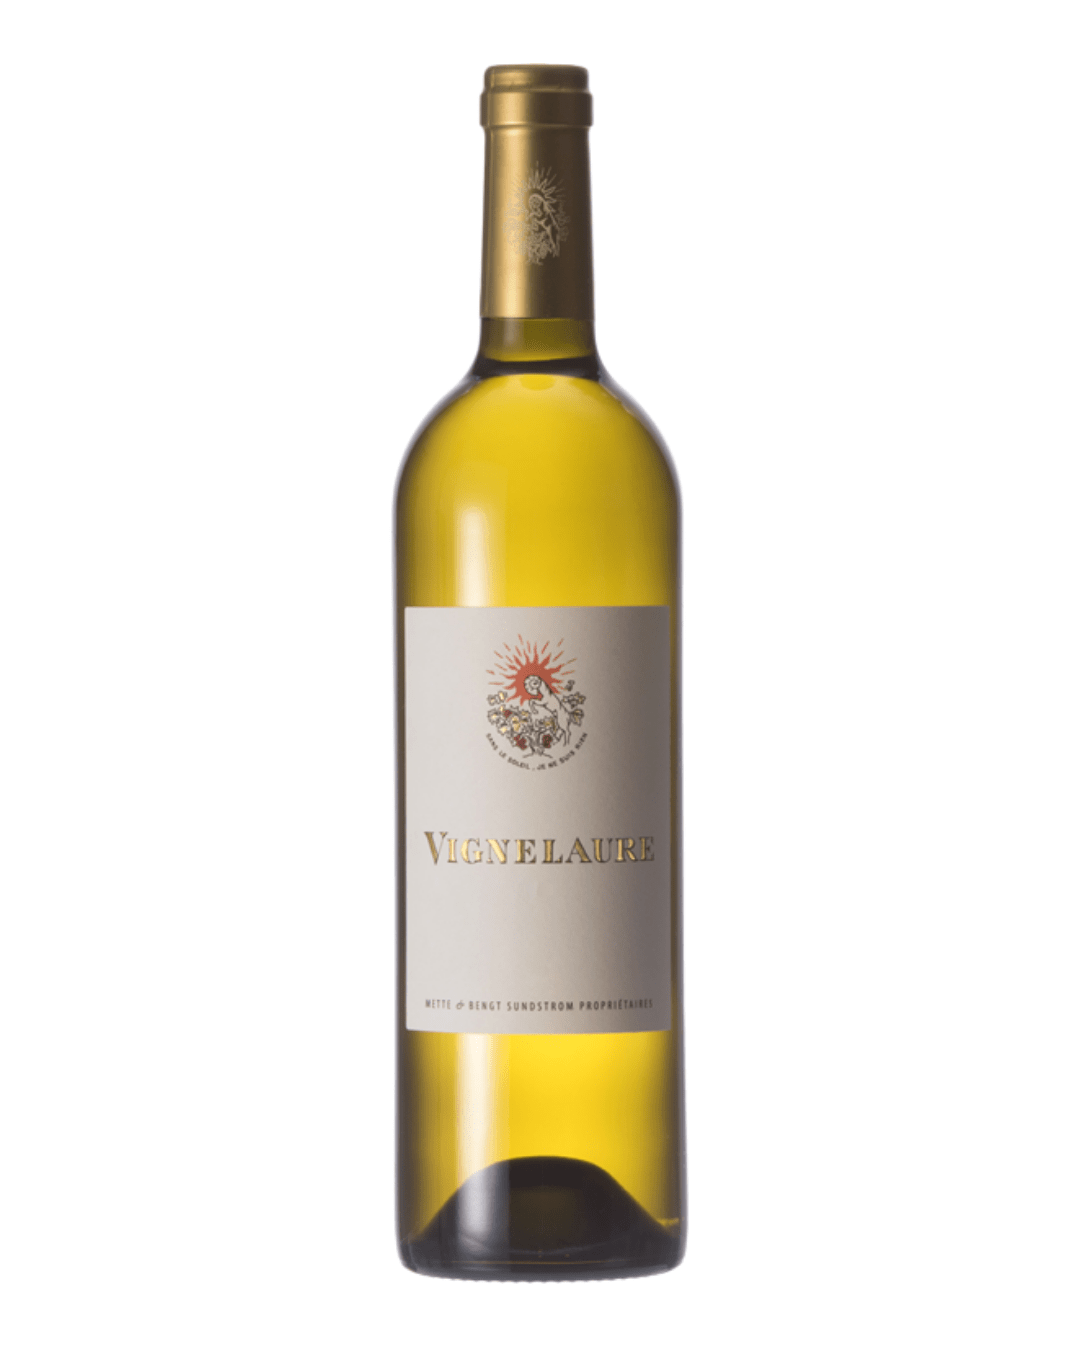 Shop Chateau Vignelaure Chateau Vignelaure Blanc IGP Mediterranee 2017 online at PENTICTON artisanal wine store in Hong Kong. Discover other French wines, promotions, workshops and featured offers at pentictonpacific.com 